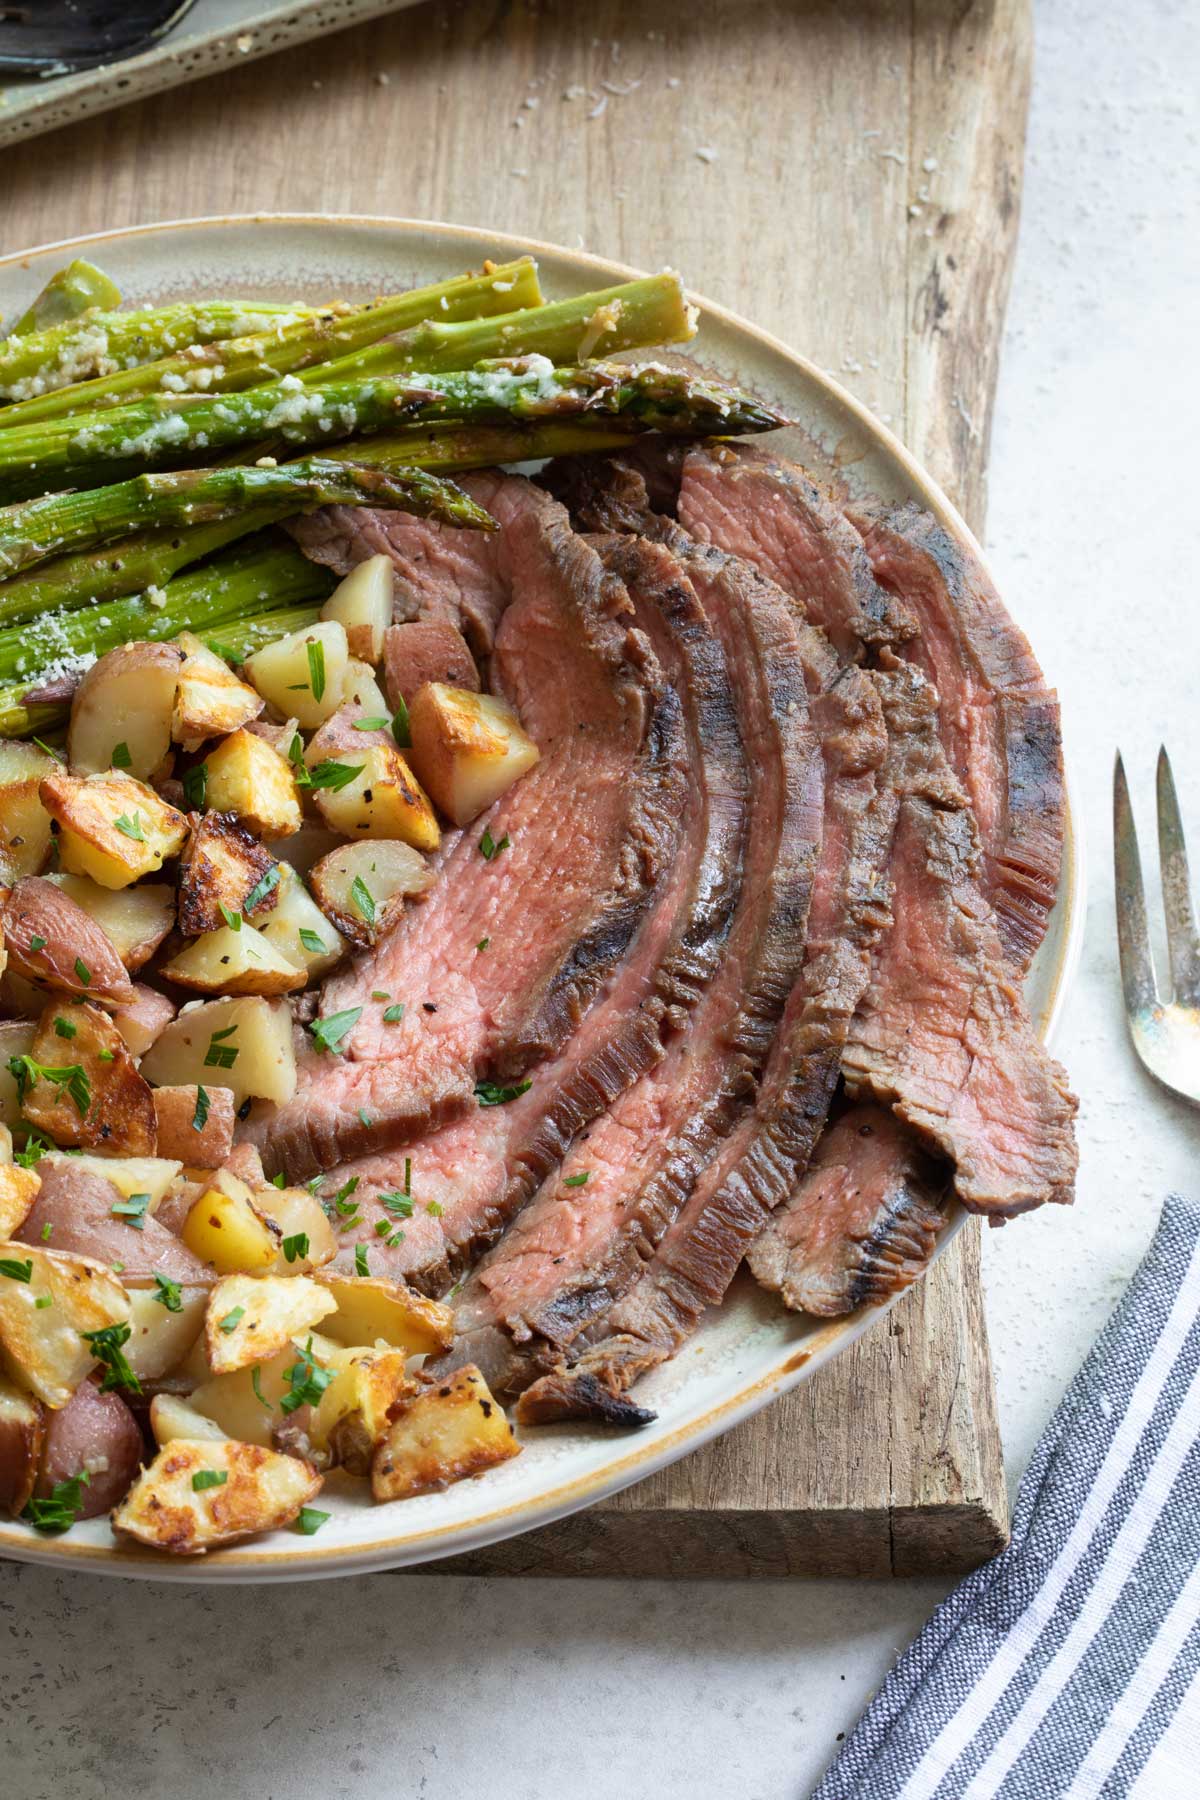 Six slices of beef on dinner plate with grilled potatoes and asparagus for complete meal.